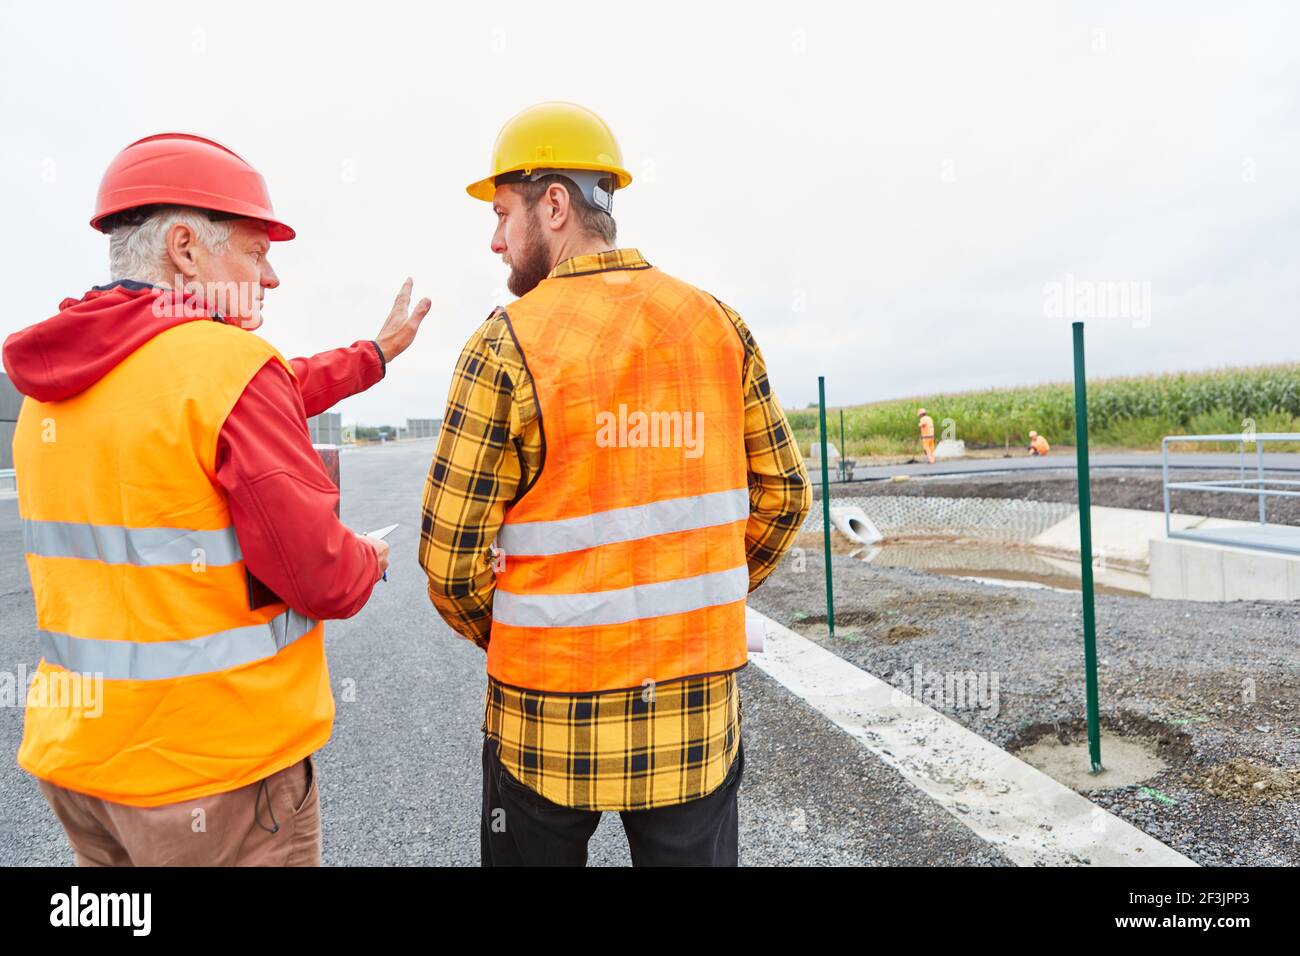 Two construction workers inspecting and developing the road construction site Stock Photo